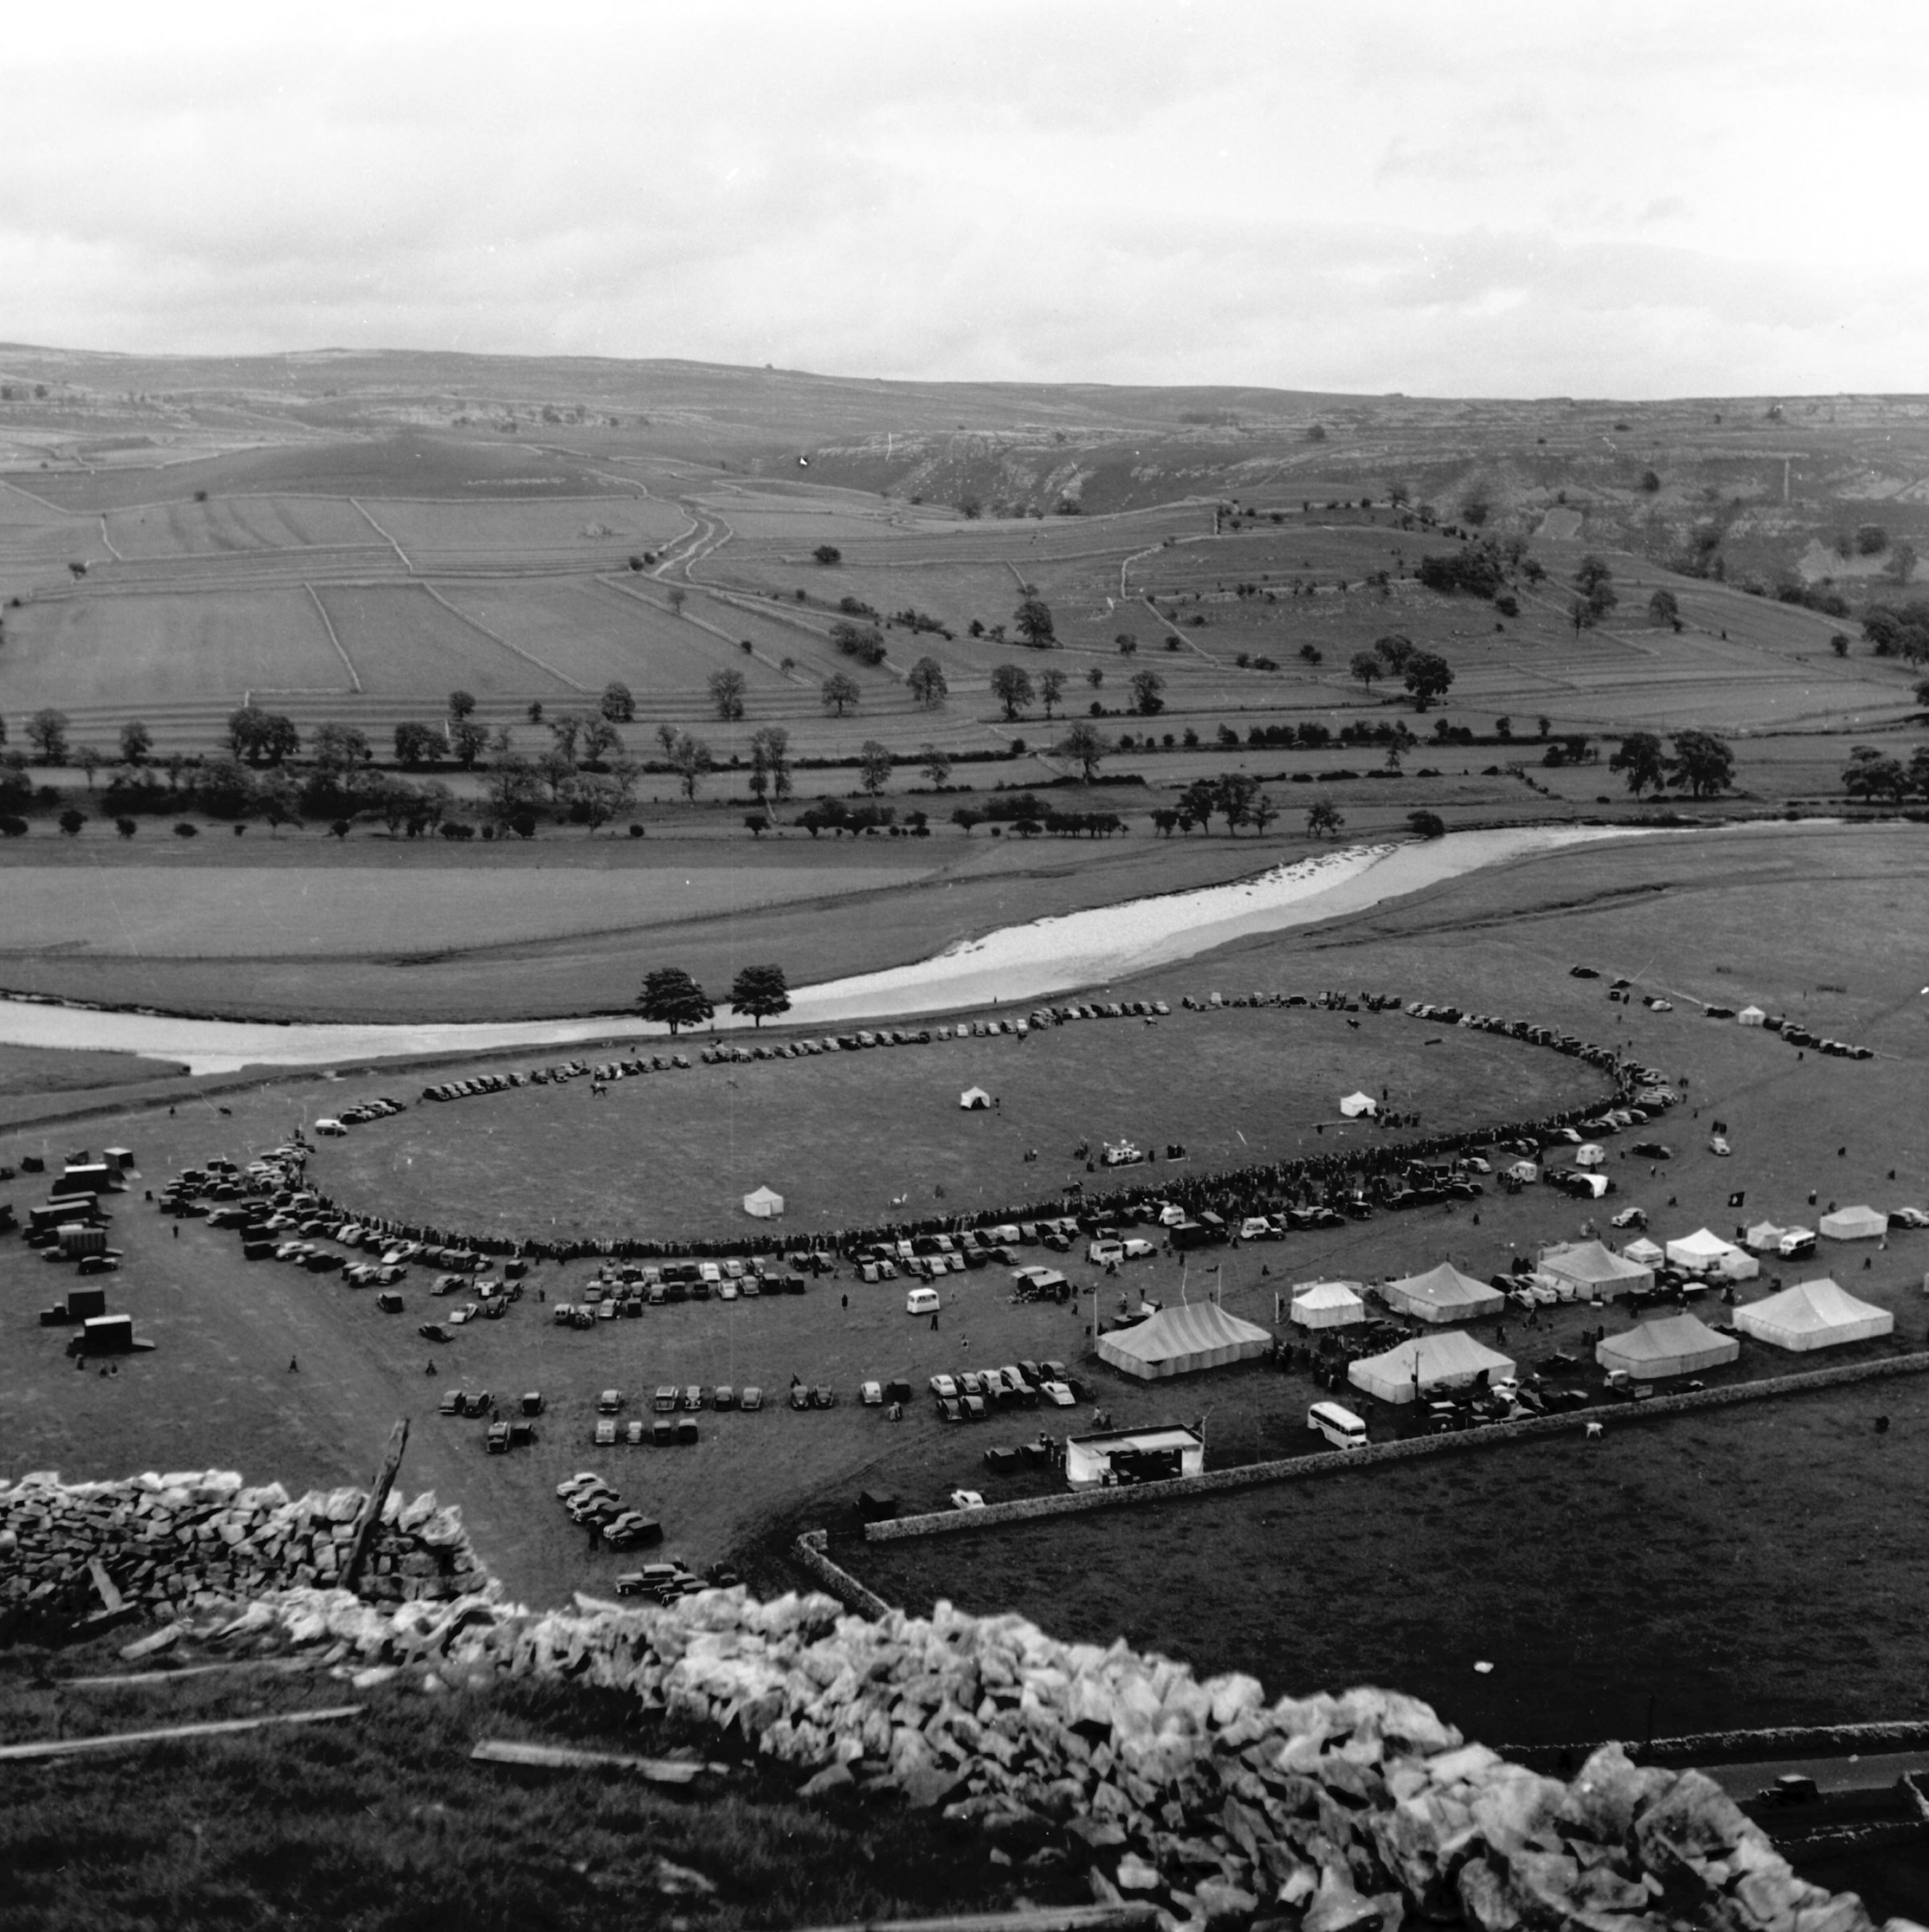 A view of Kilnsey Show, one of the most important agricultural shows in the Yorkshire Dales. 